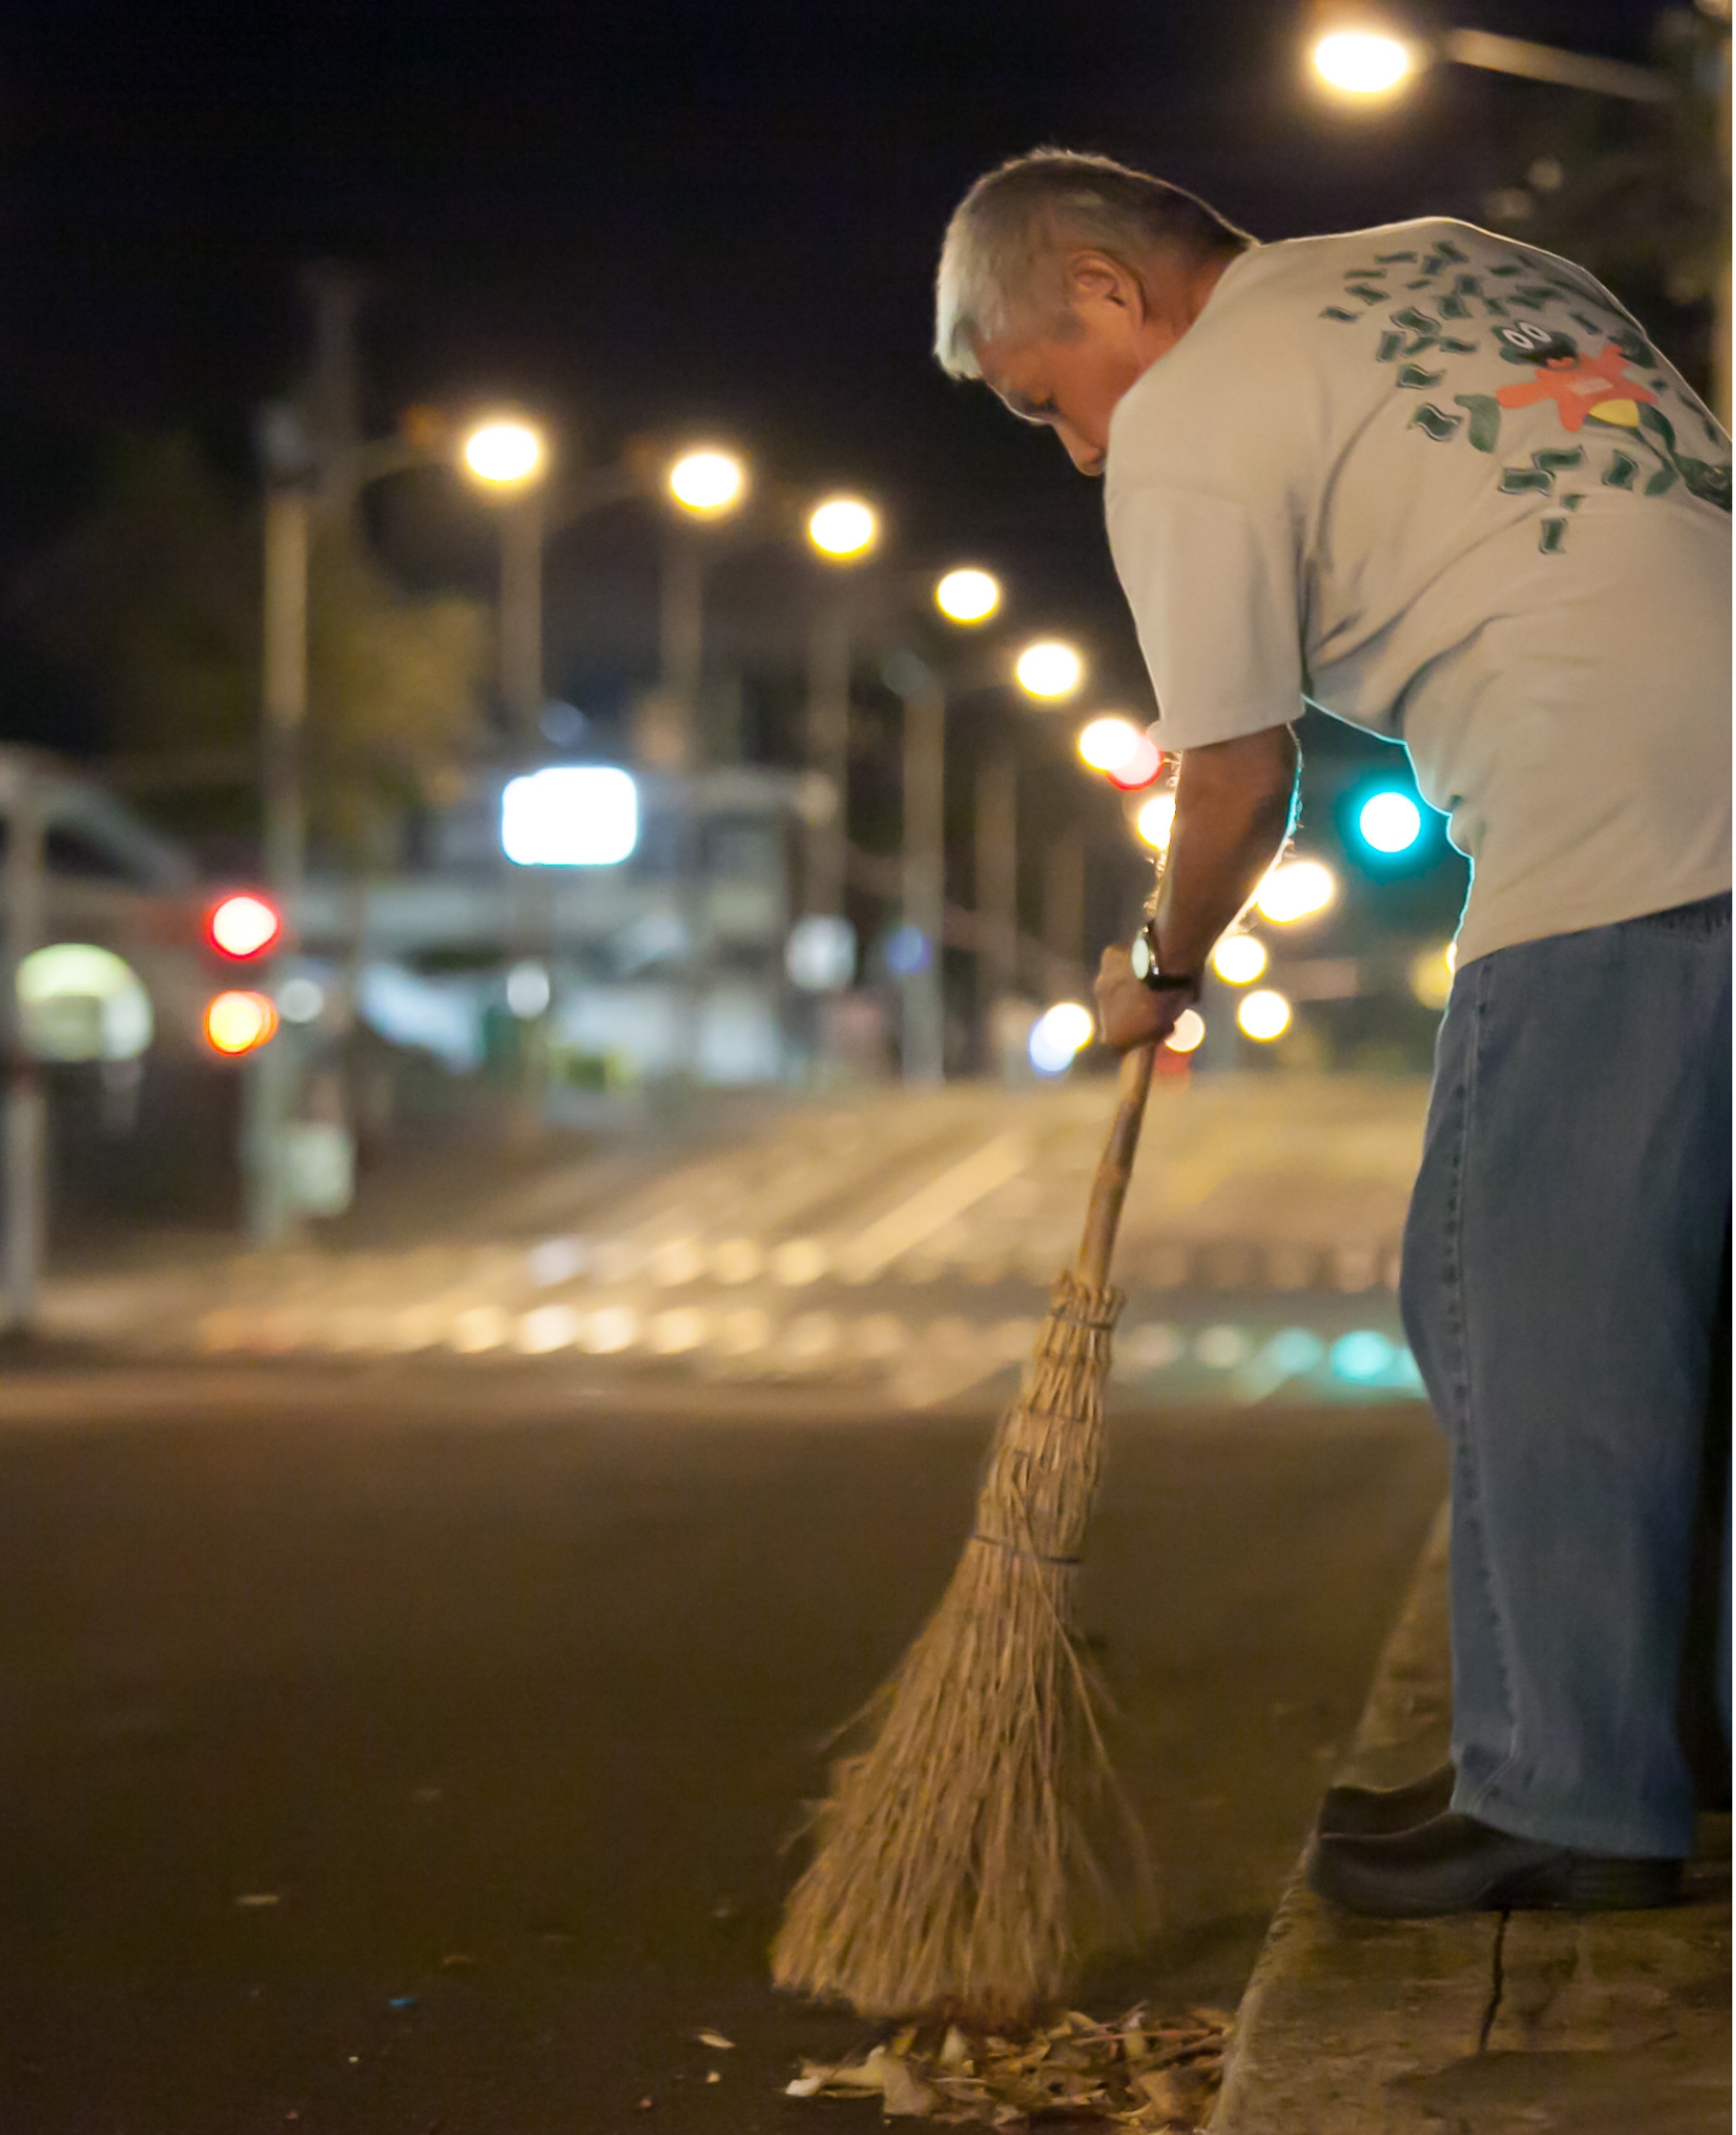 On a city street in the predawn darkness, a gray-haired man sweeps trash into a neat pile near a curb.